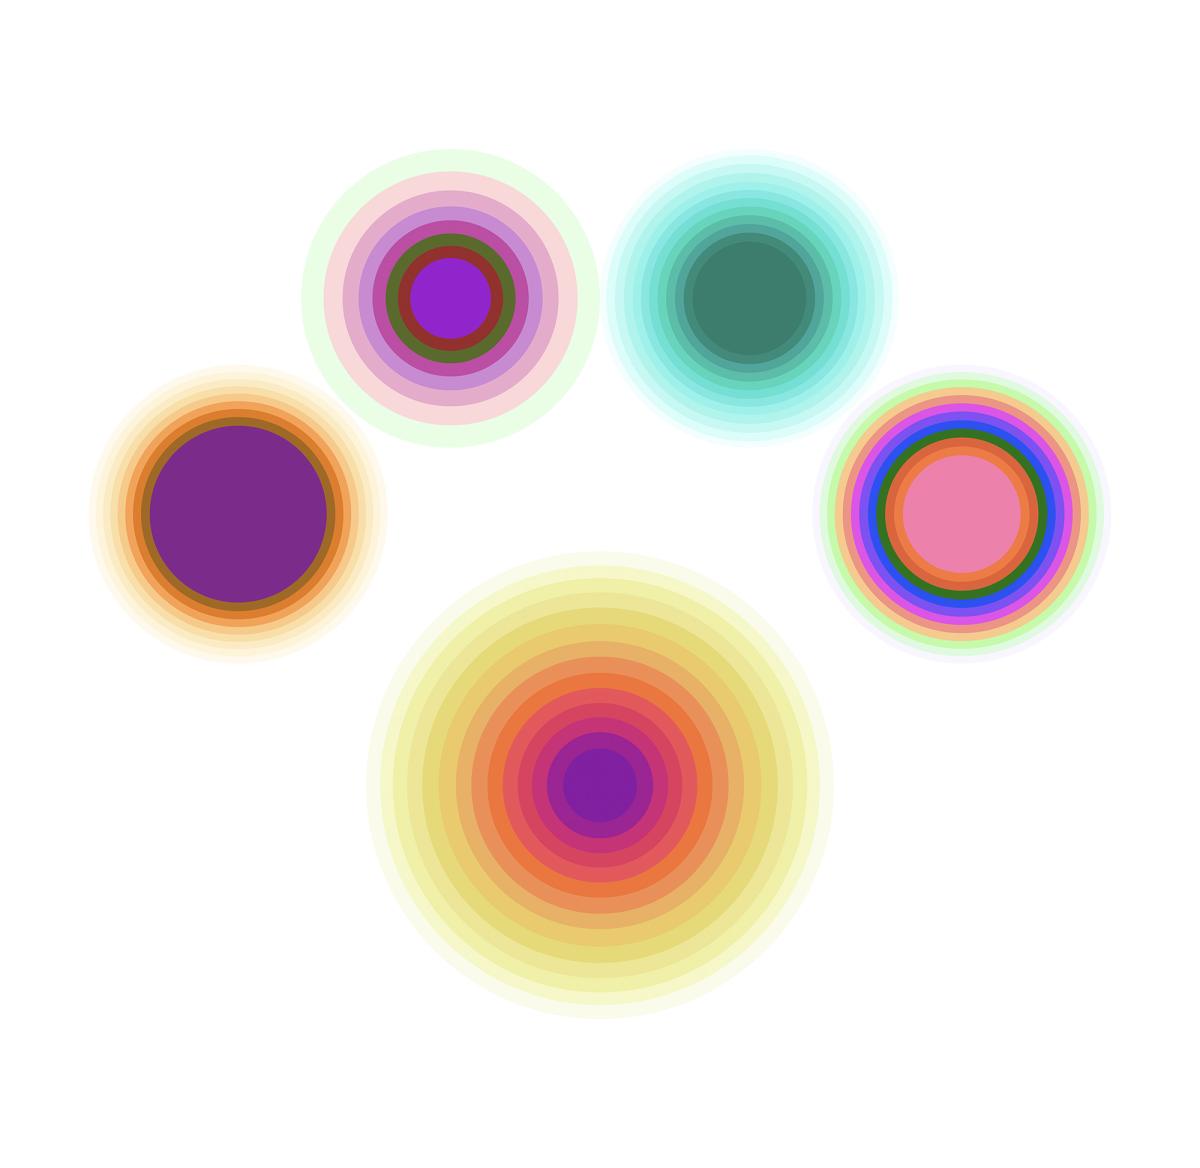 Digital Rendering of Linling Lu Soundwaves installation consisting of five circular canvases with colorful concentric rings